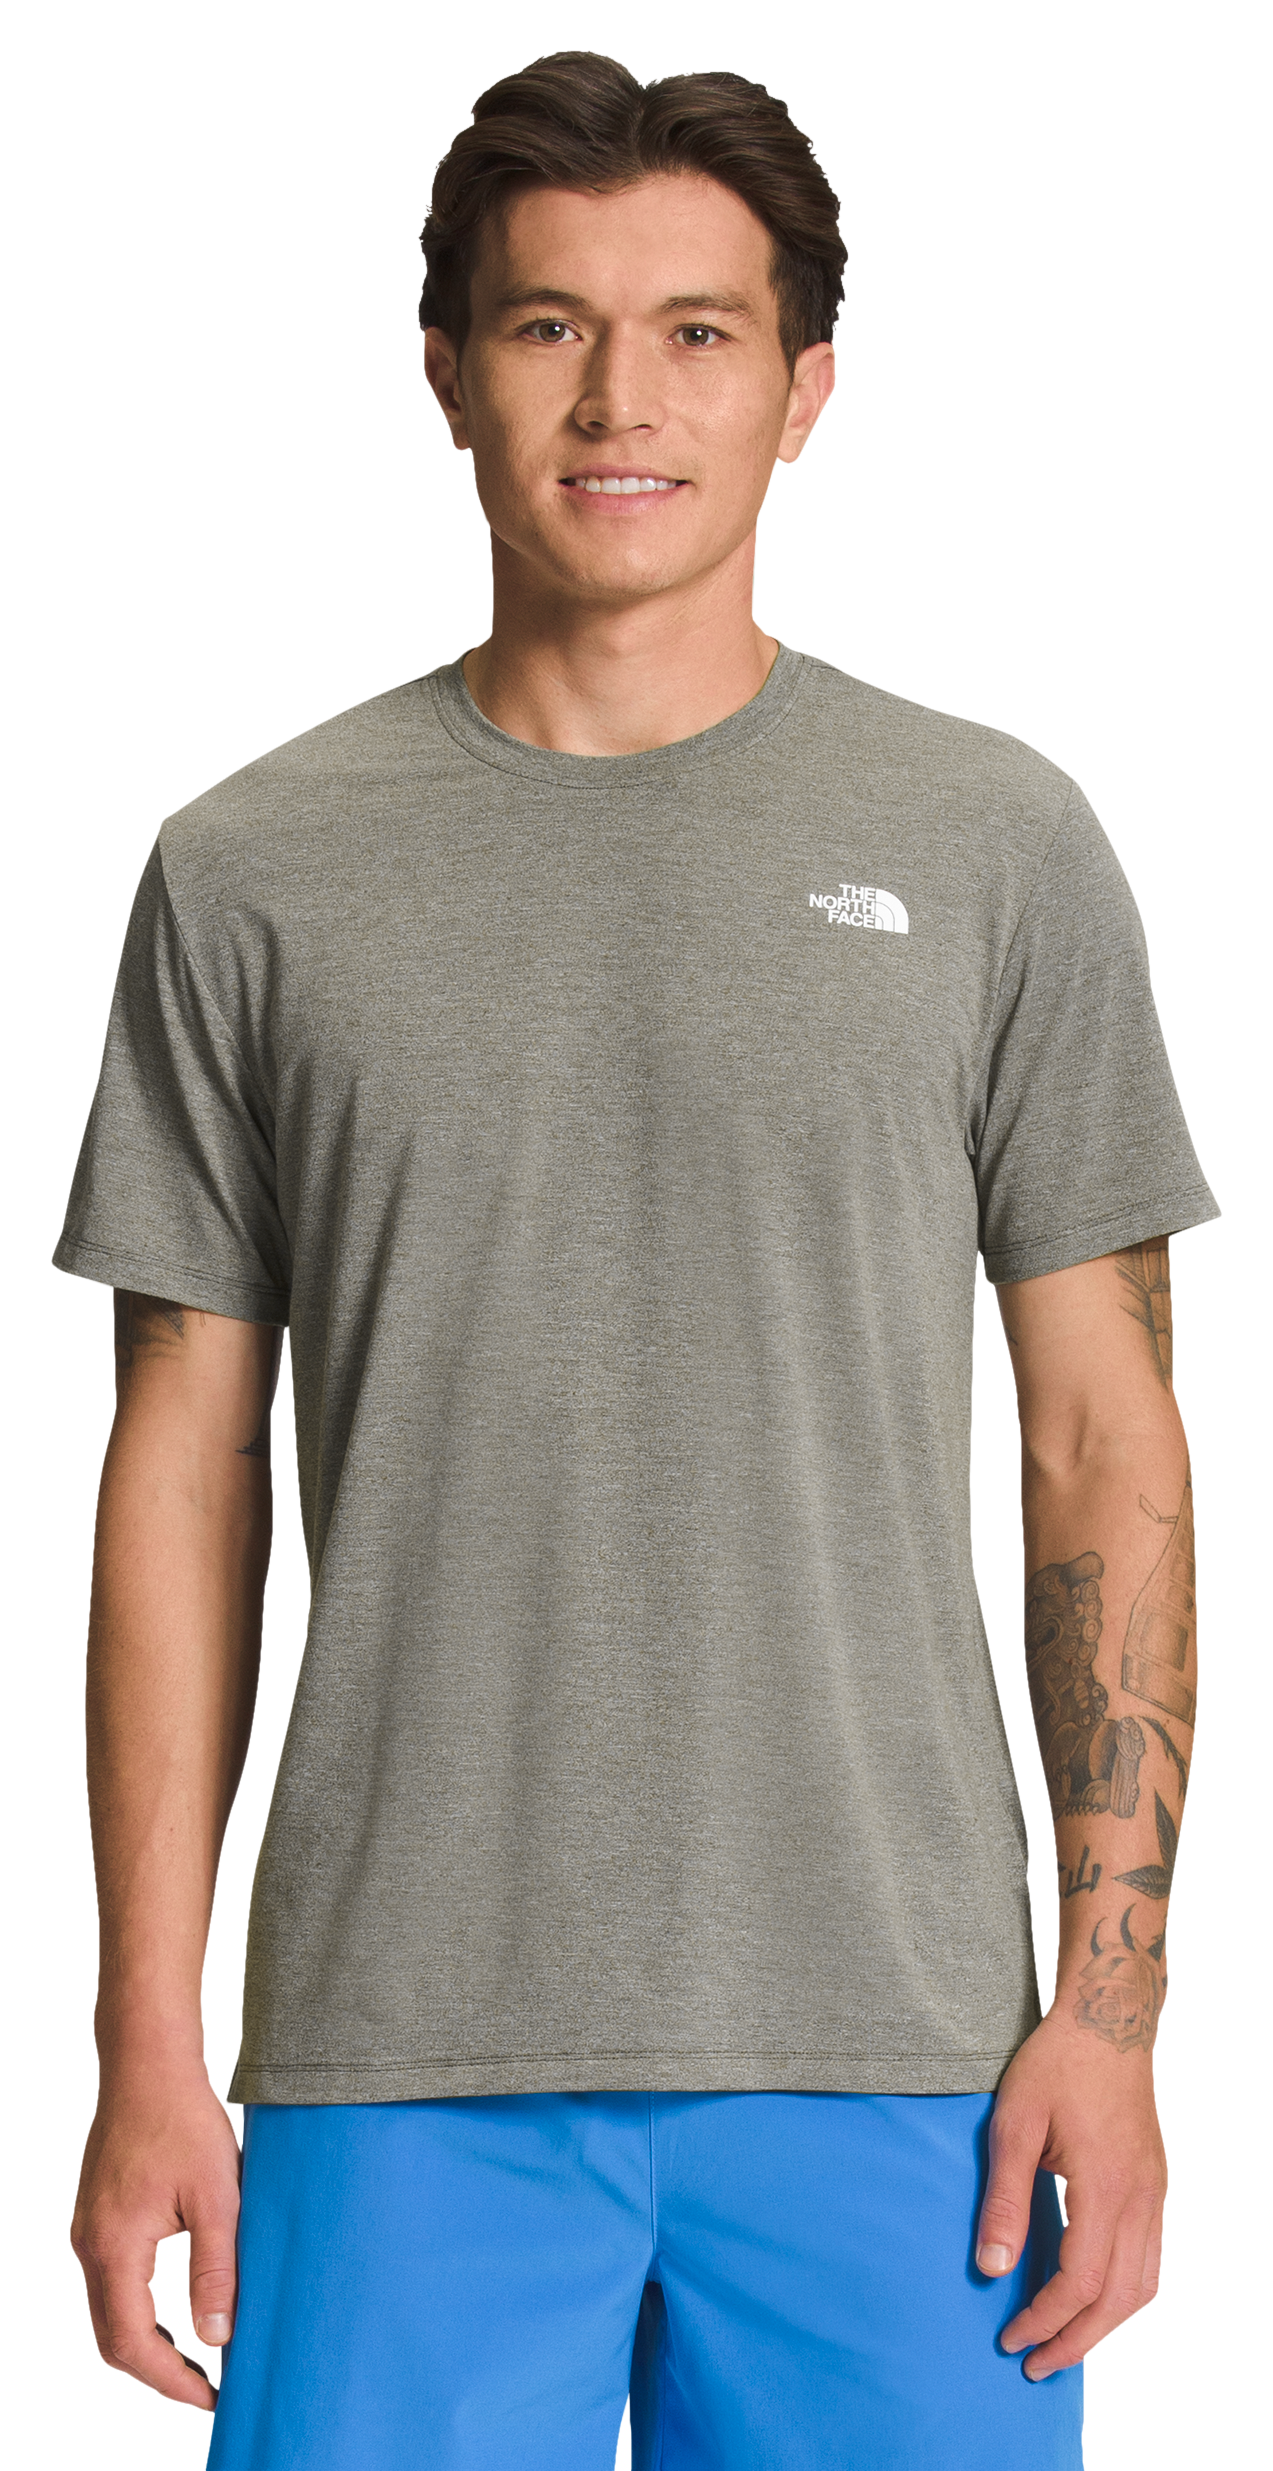 The North Face Wander Short-Sleeve Shirt for Men - New Taupe Green Heather - S